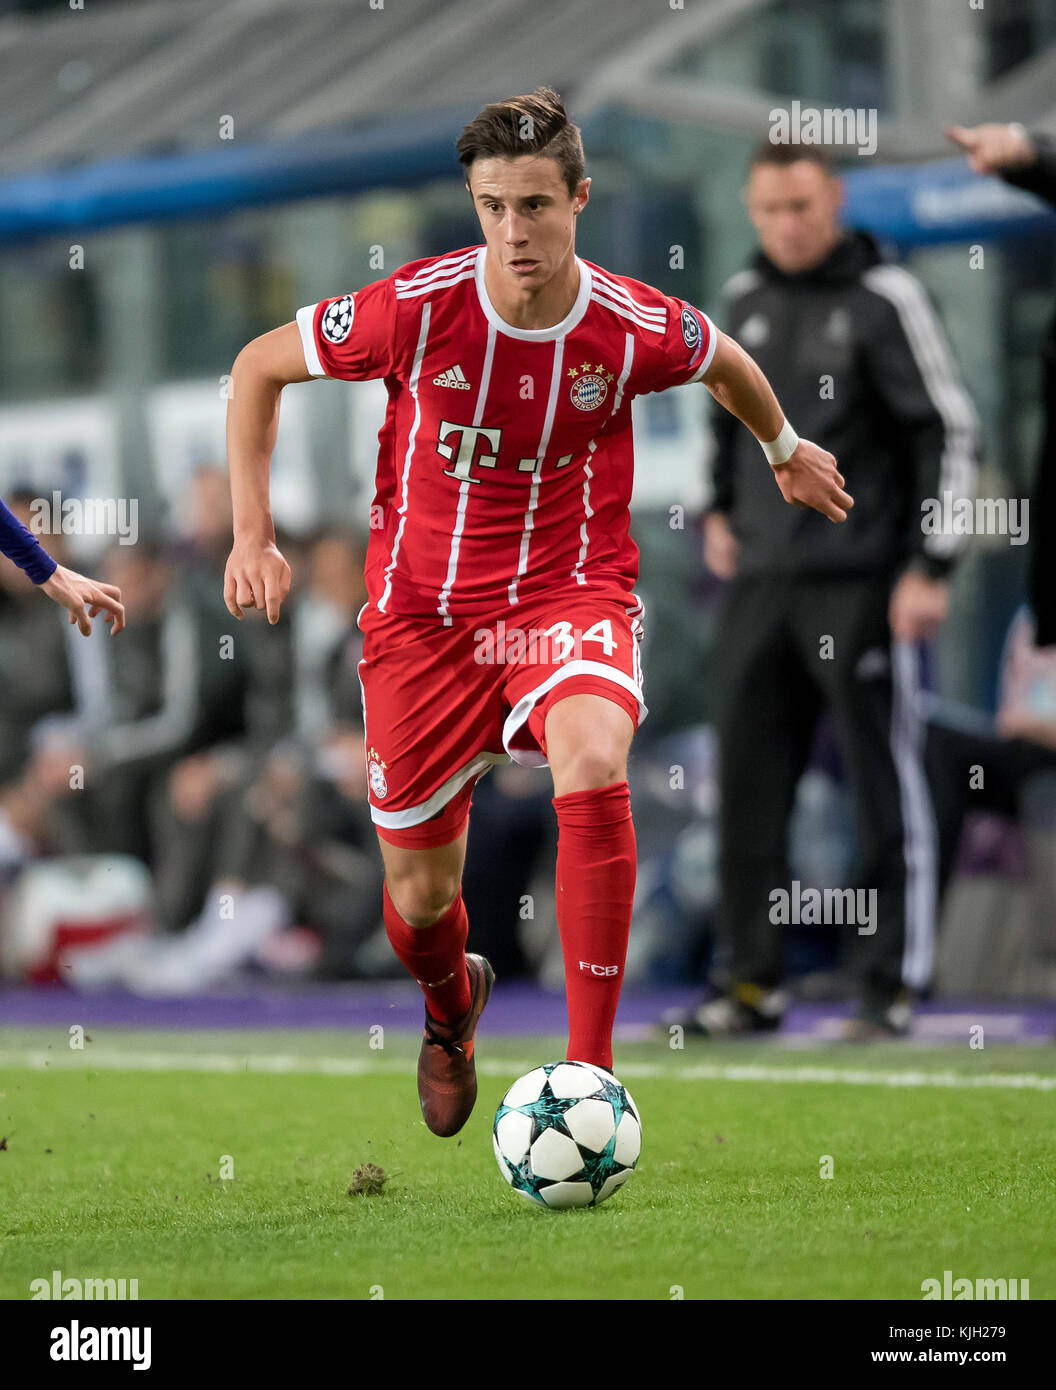 Anderlecht, Belgium. 22nd Nov, 2017. Munich's Marco Friedl in action during  the UEFA Champions League soccer match between FC Bayern Munich and RSC  Anderlecht at the Constant Vanden Stock stadium in Anderlecht,